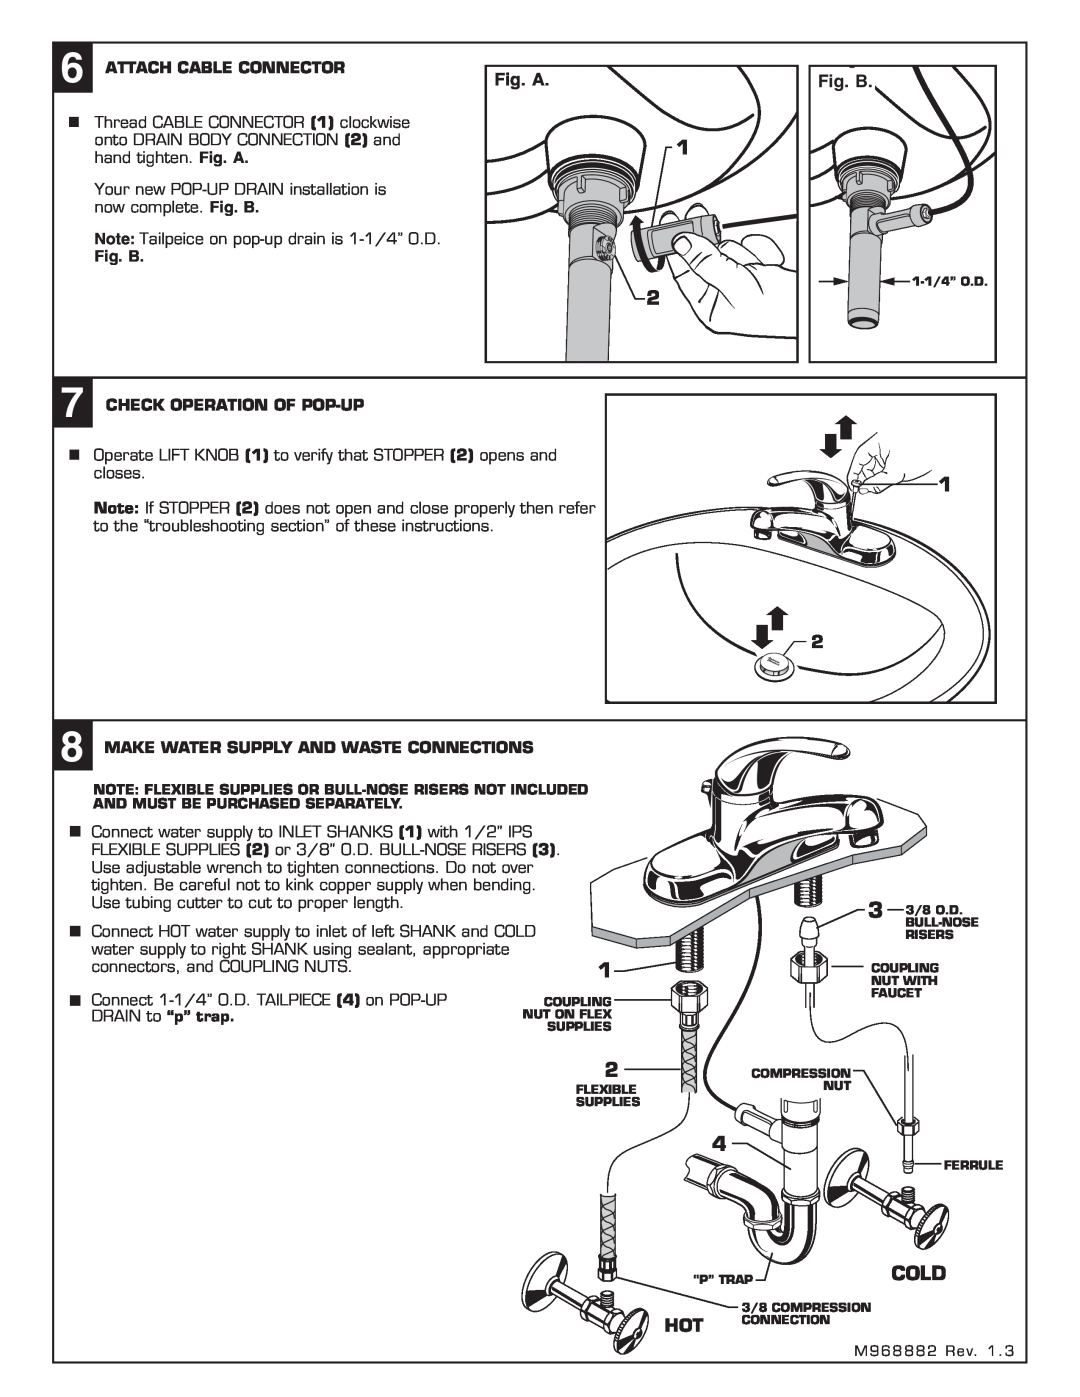 American Standard Single Control Lavatory Faucet with Speed Connect Drain, 2175.503 Cold, Fig. A, Fig. B 